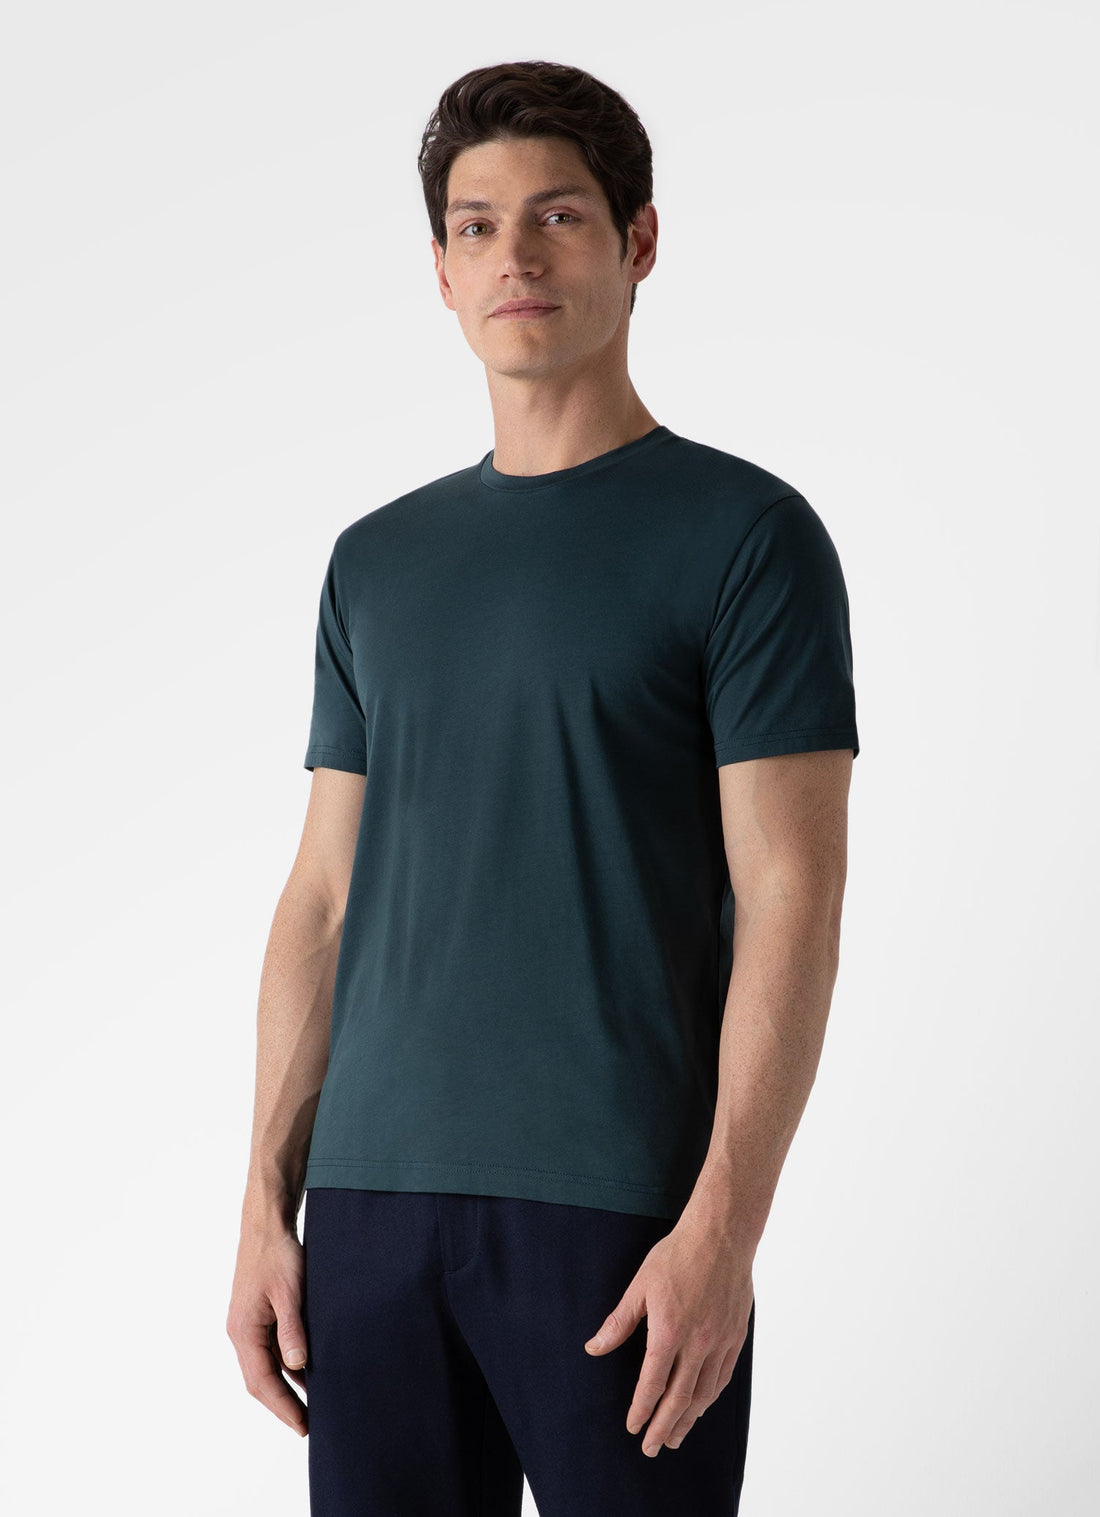 Men's Riviera Midweight T-shirt in Peacock